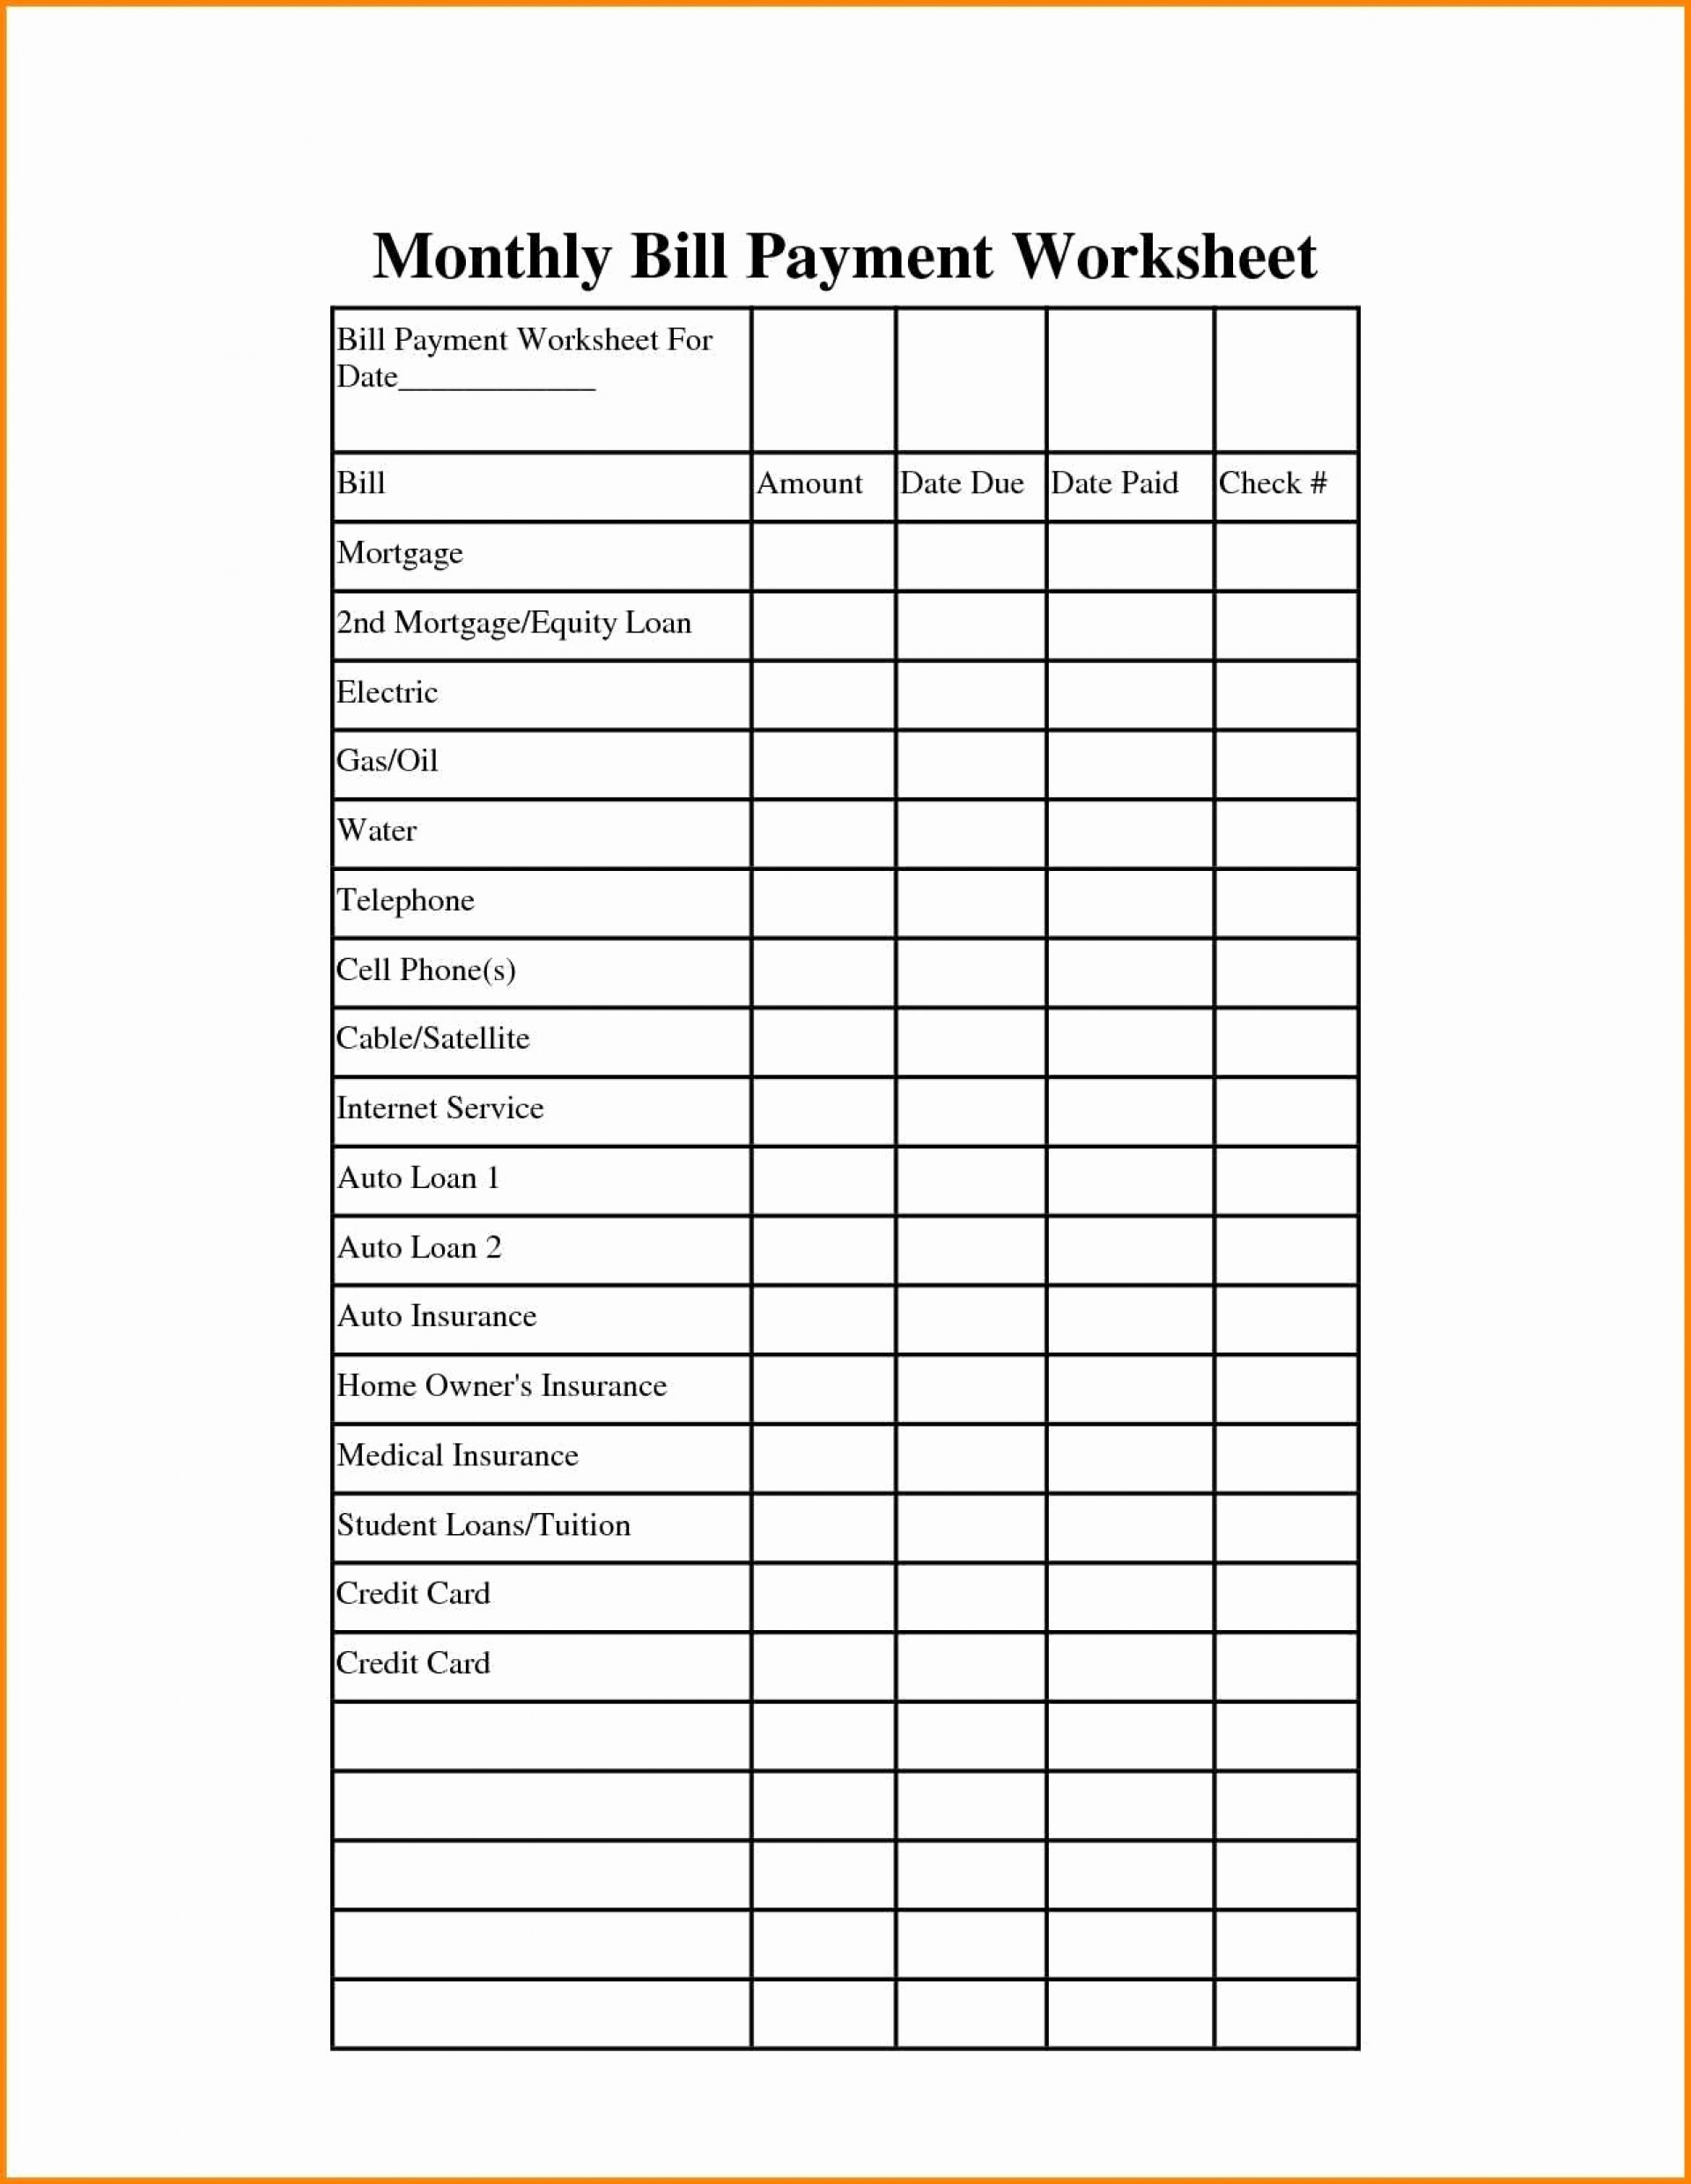 monthly-bill-payment-log-excel-calendar-for-planning